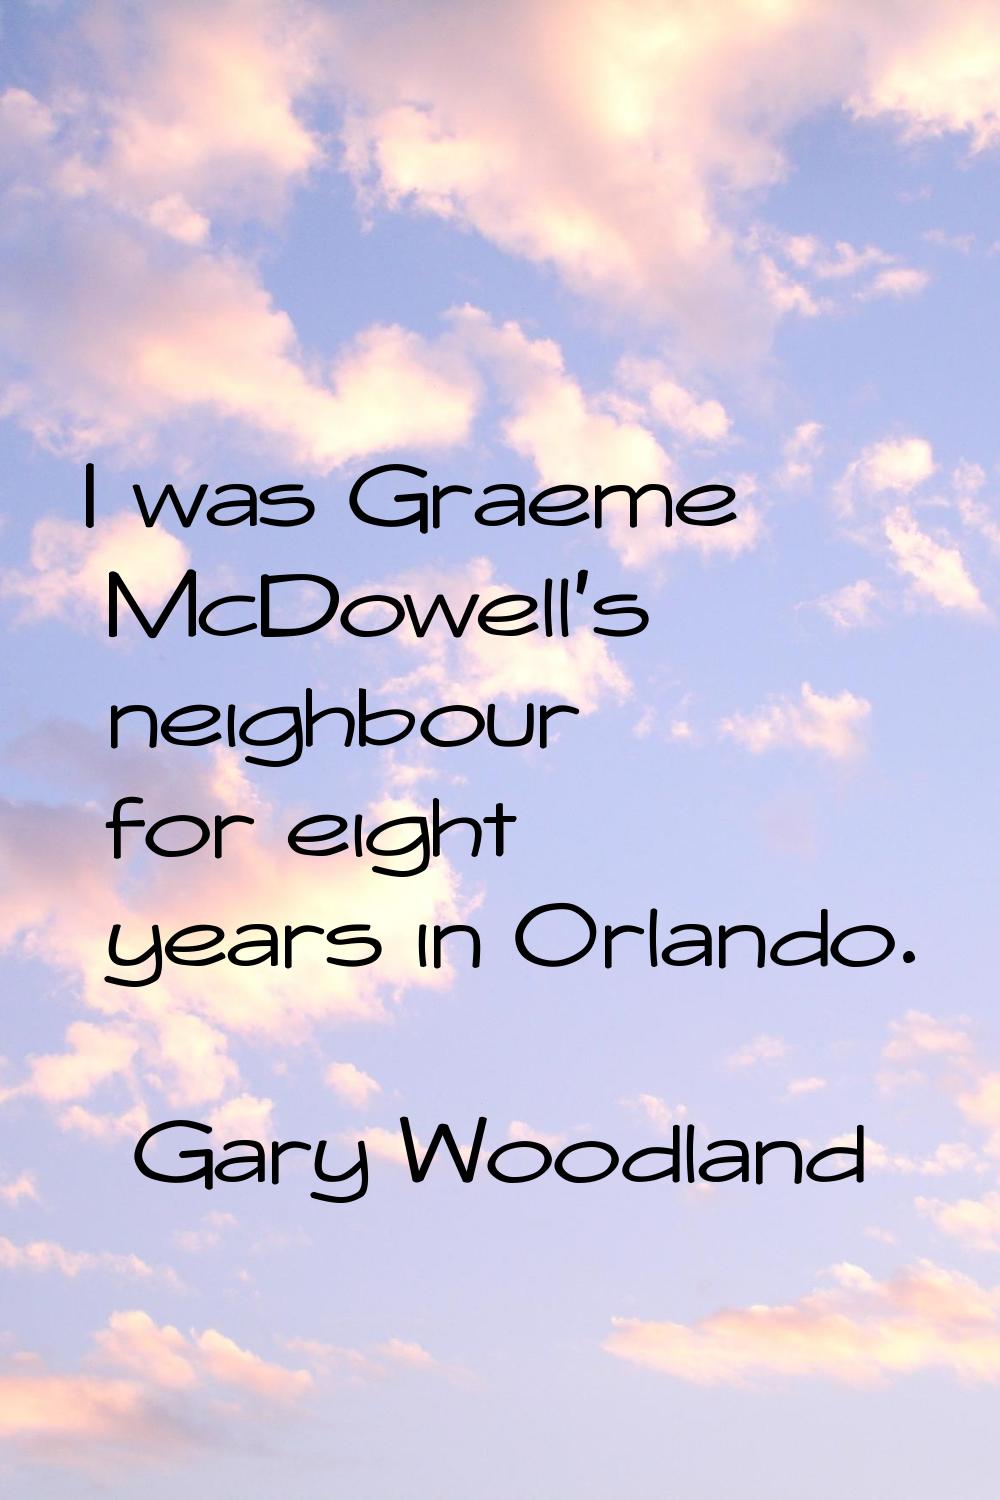 I was Graeme McDowell's neighbour for eight years in Orlando.